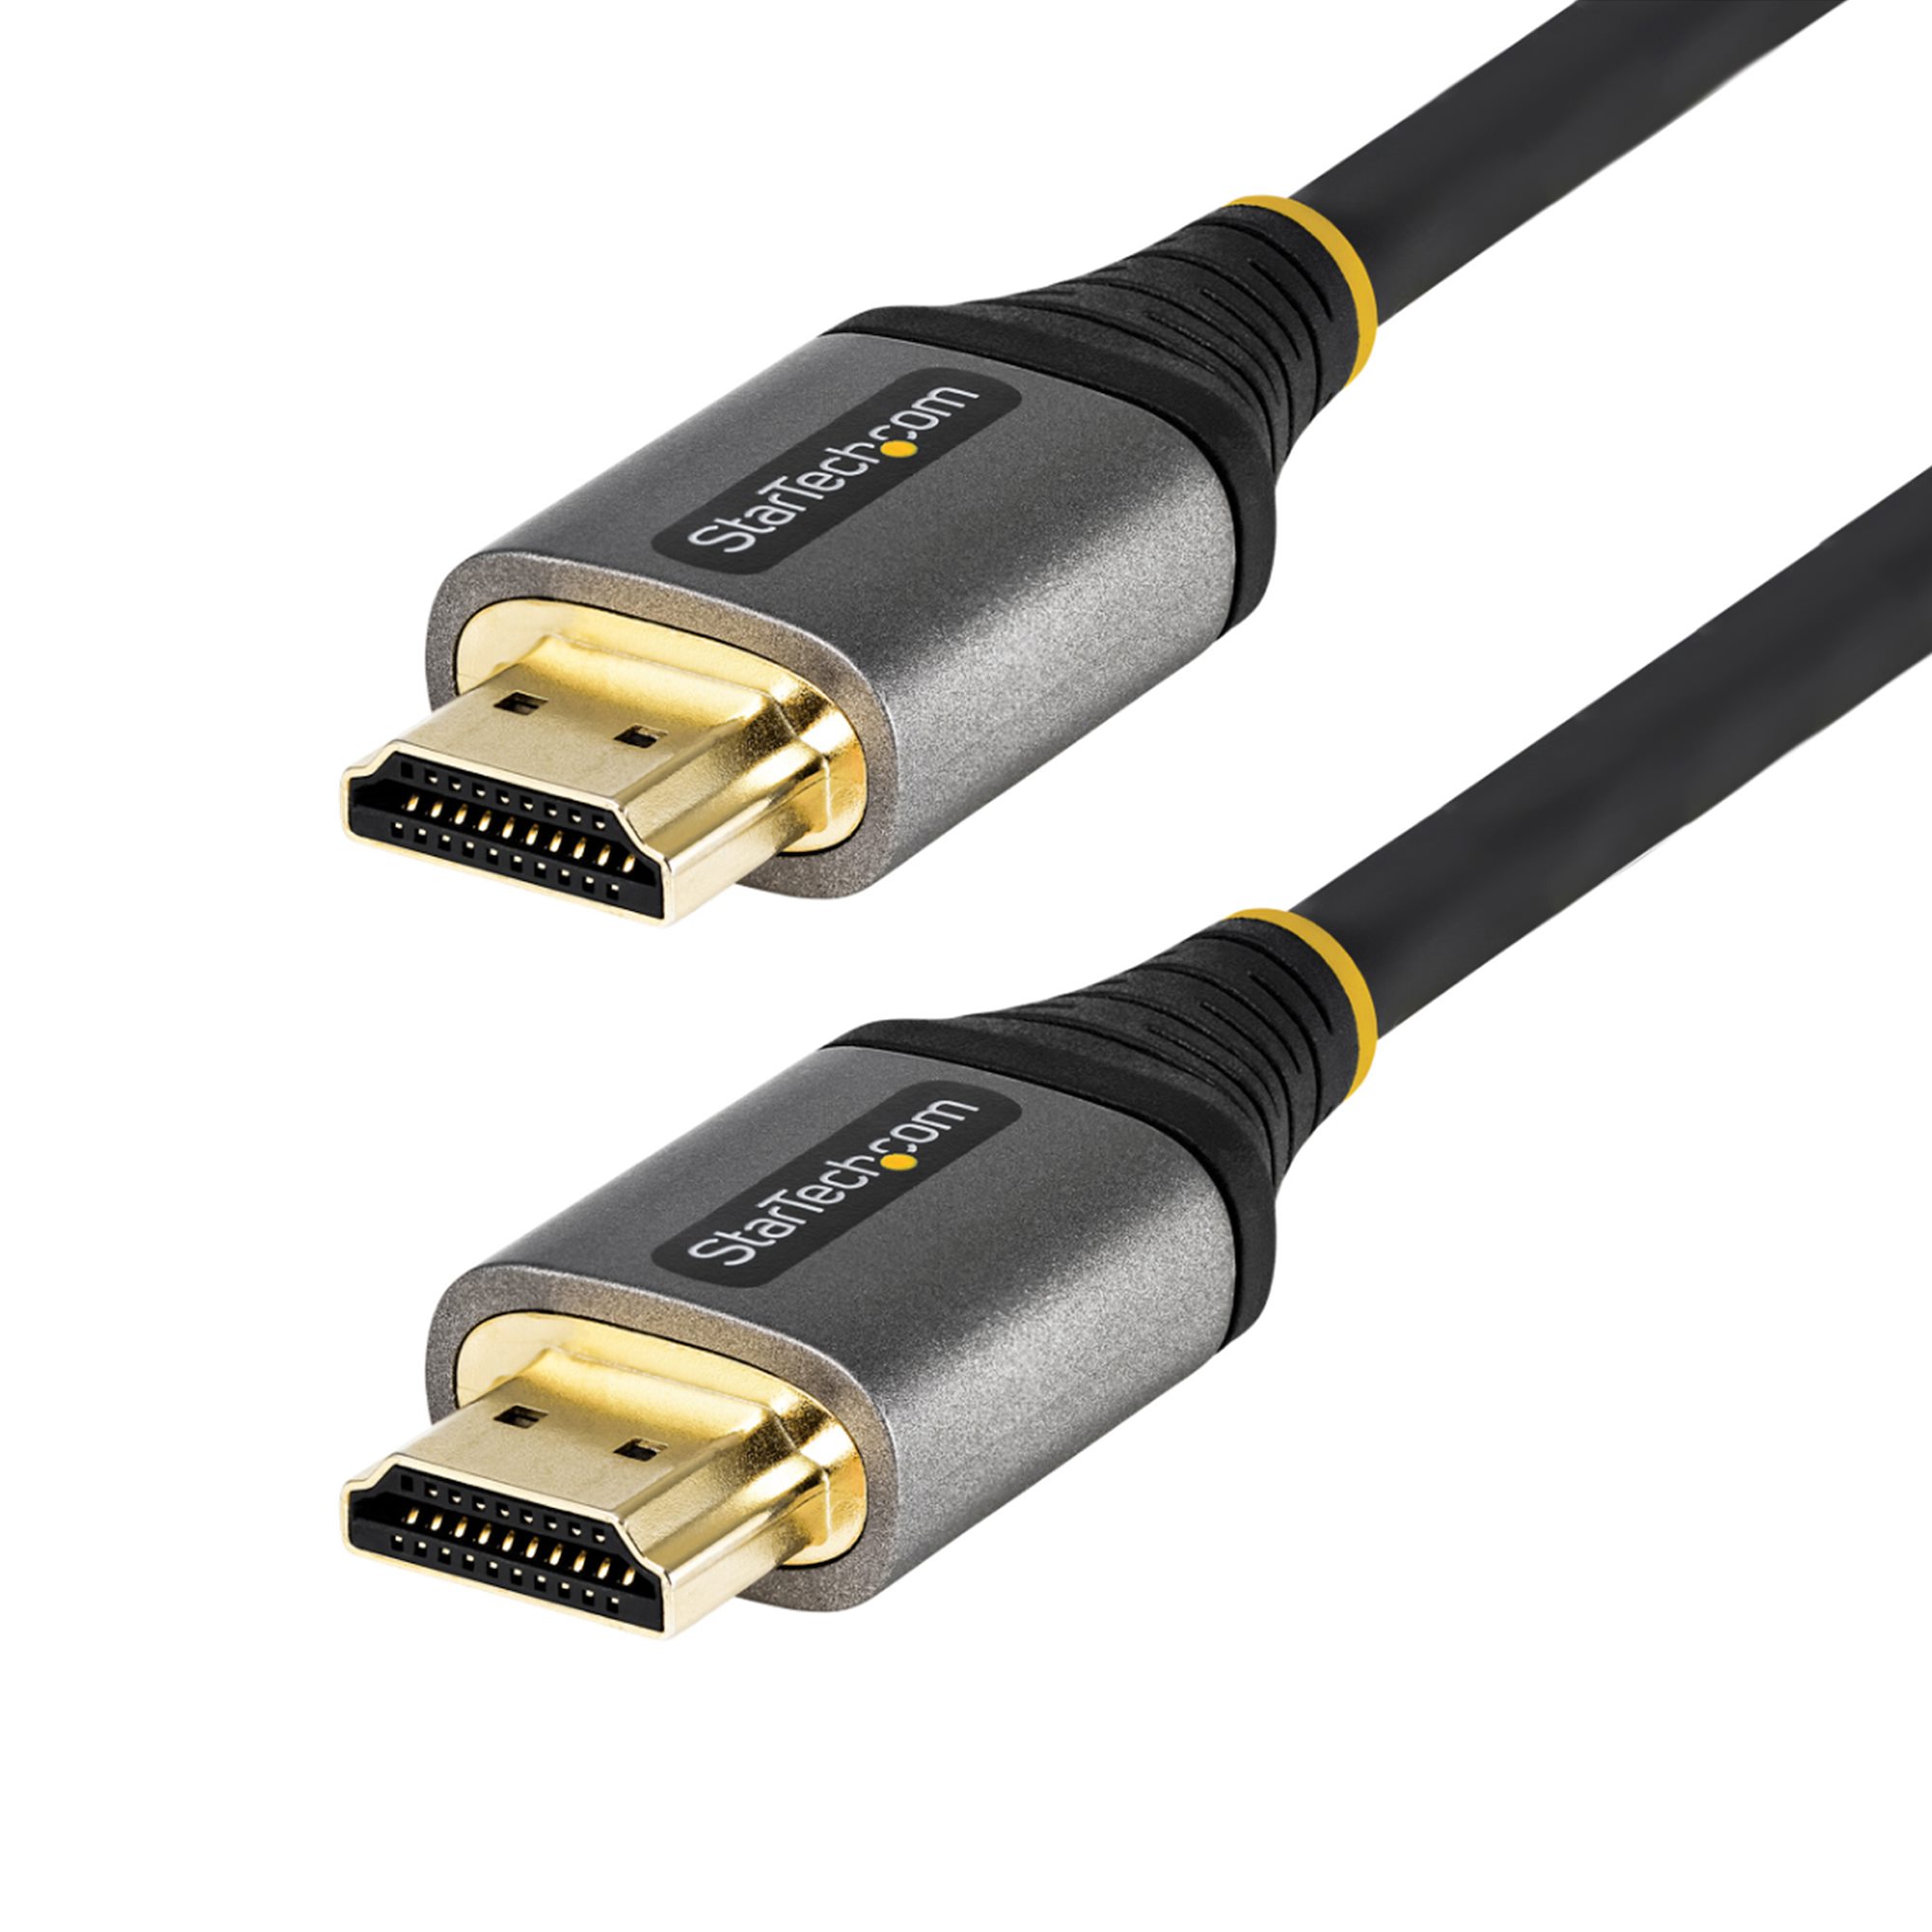 13ft (4m) Premium Certified HDMI 2.0 Cable - High-Speed Ultra HD 4K 60Hz  HDMI Cable with Ethernet - HDR10, ARC - TPE Jacket - UHD HDMI Video Cord 